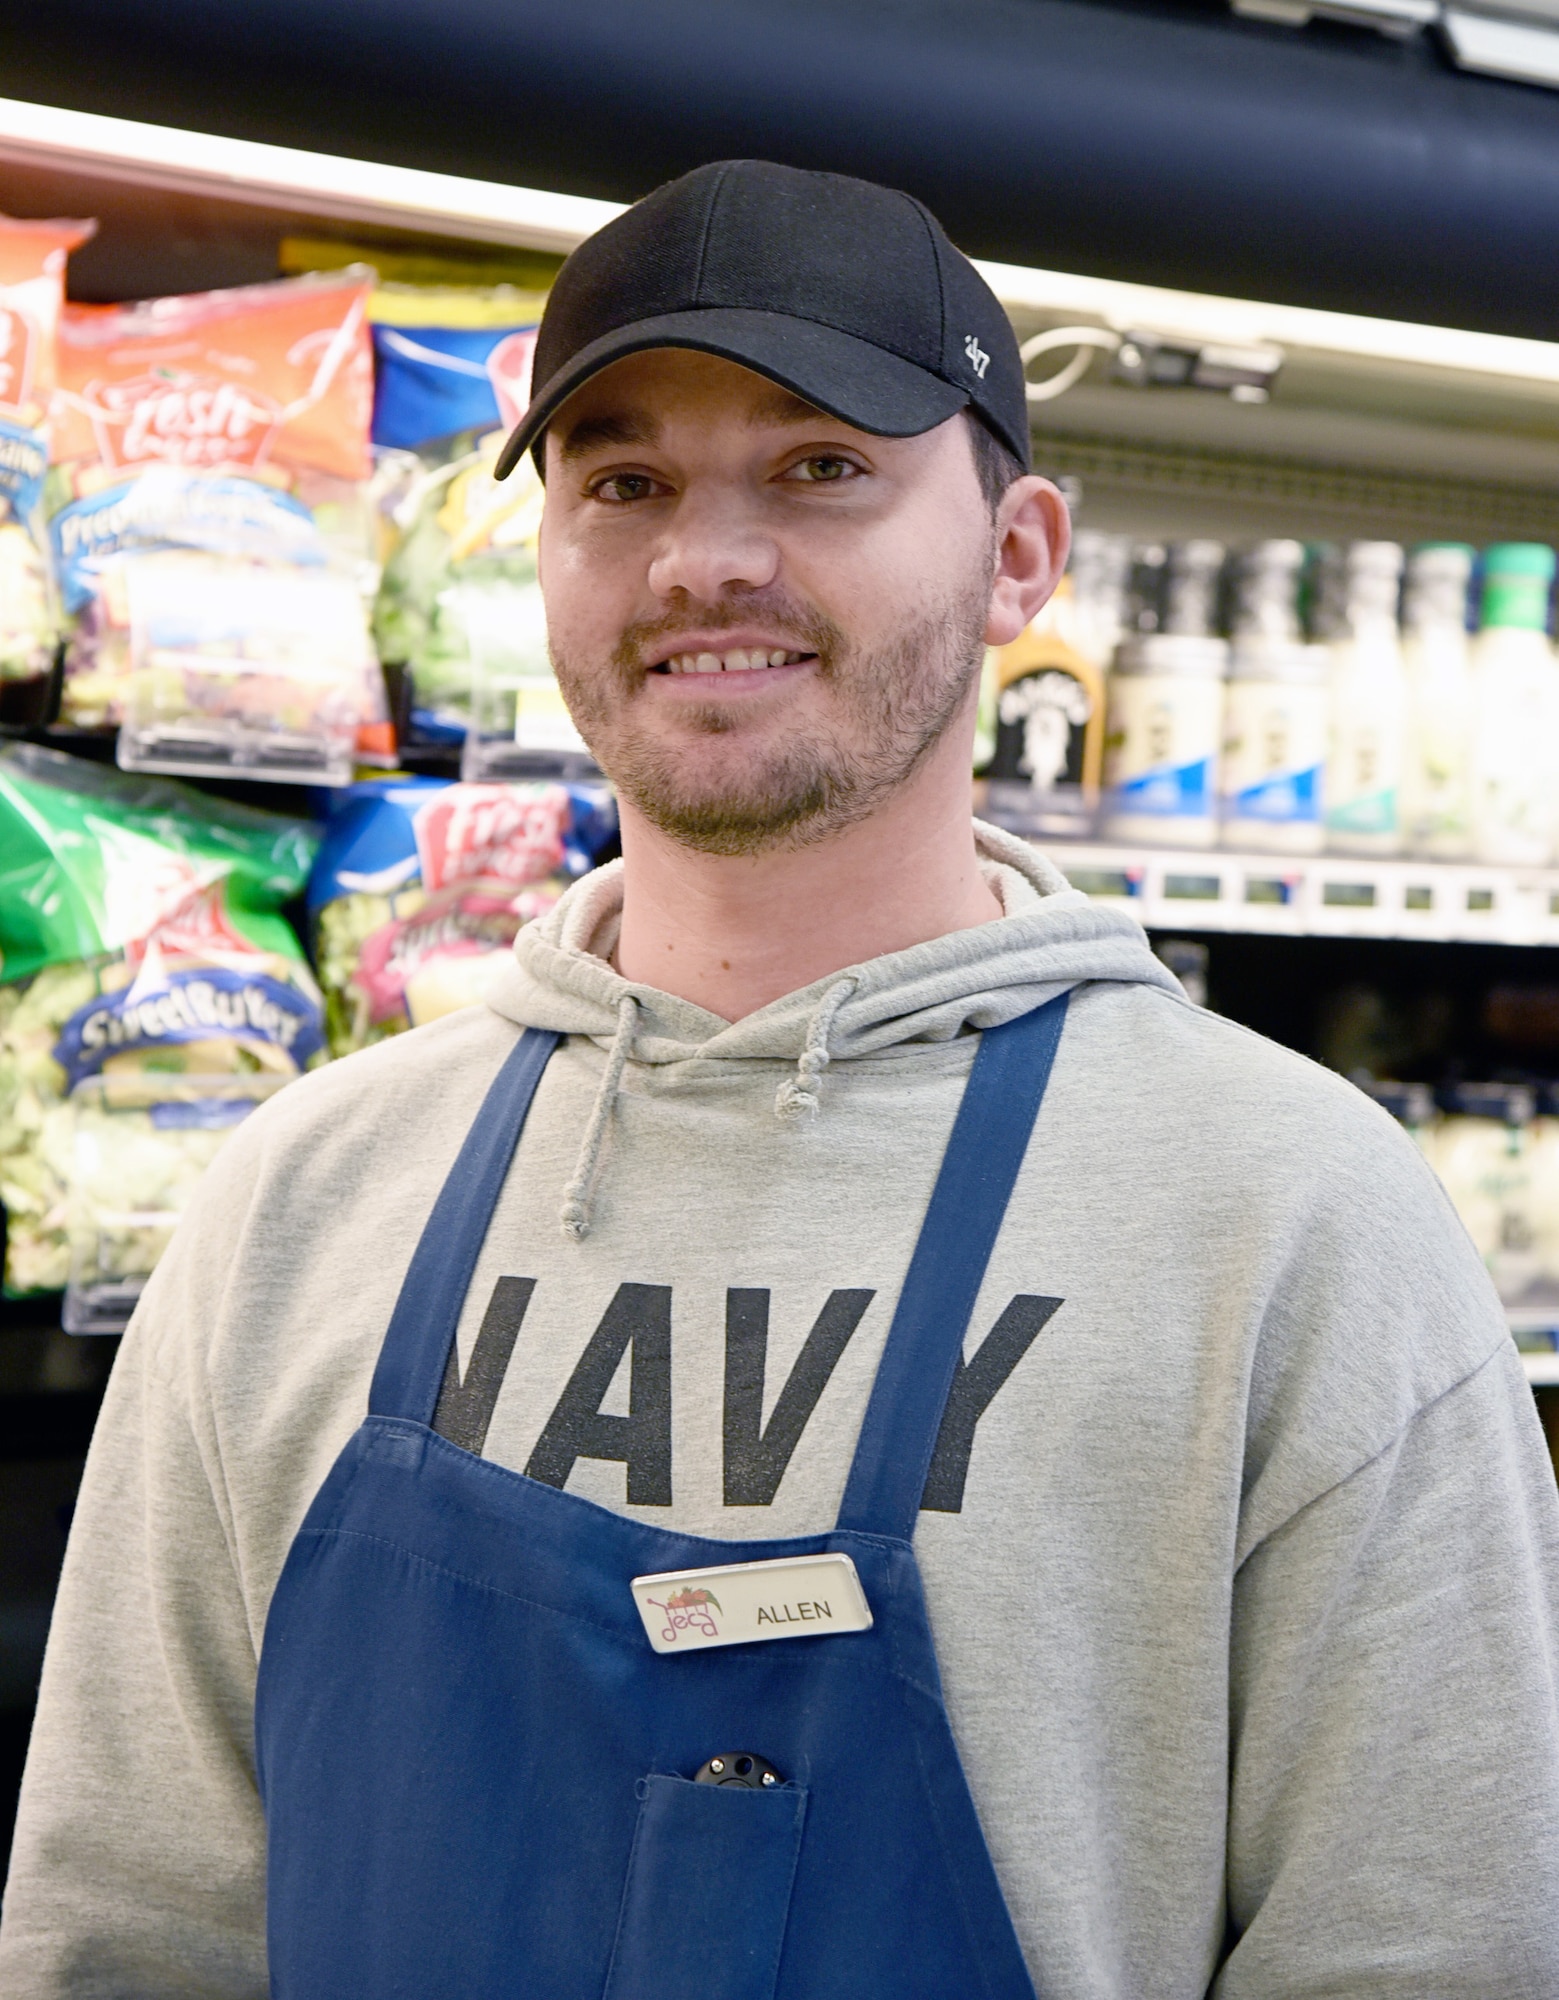 Allen Kalsem works in the produce section of the Tinker Commissary and has worked at the store for about six months. His duties include stocking shelves as quickly as possible after trucks come in and cleaning and disinfecting the produce area.